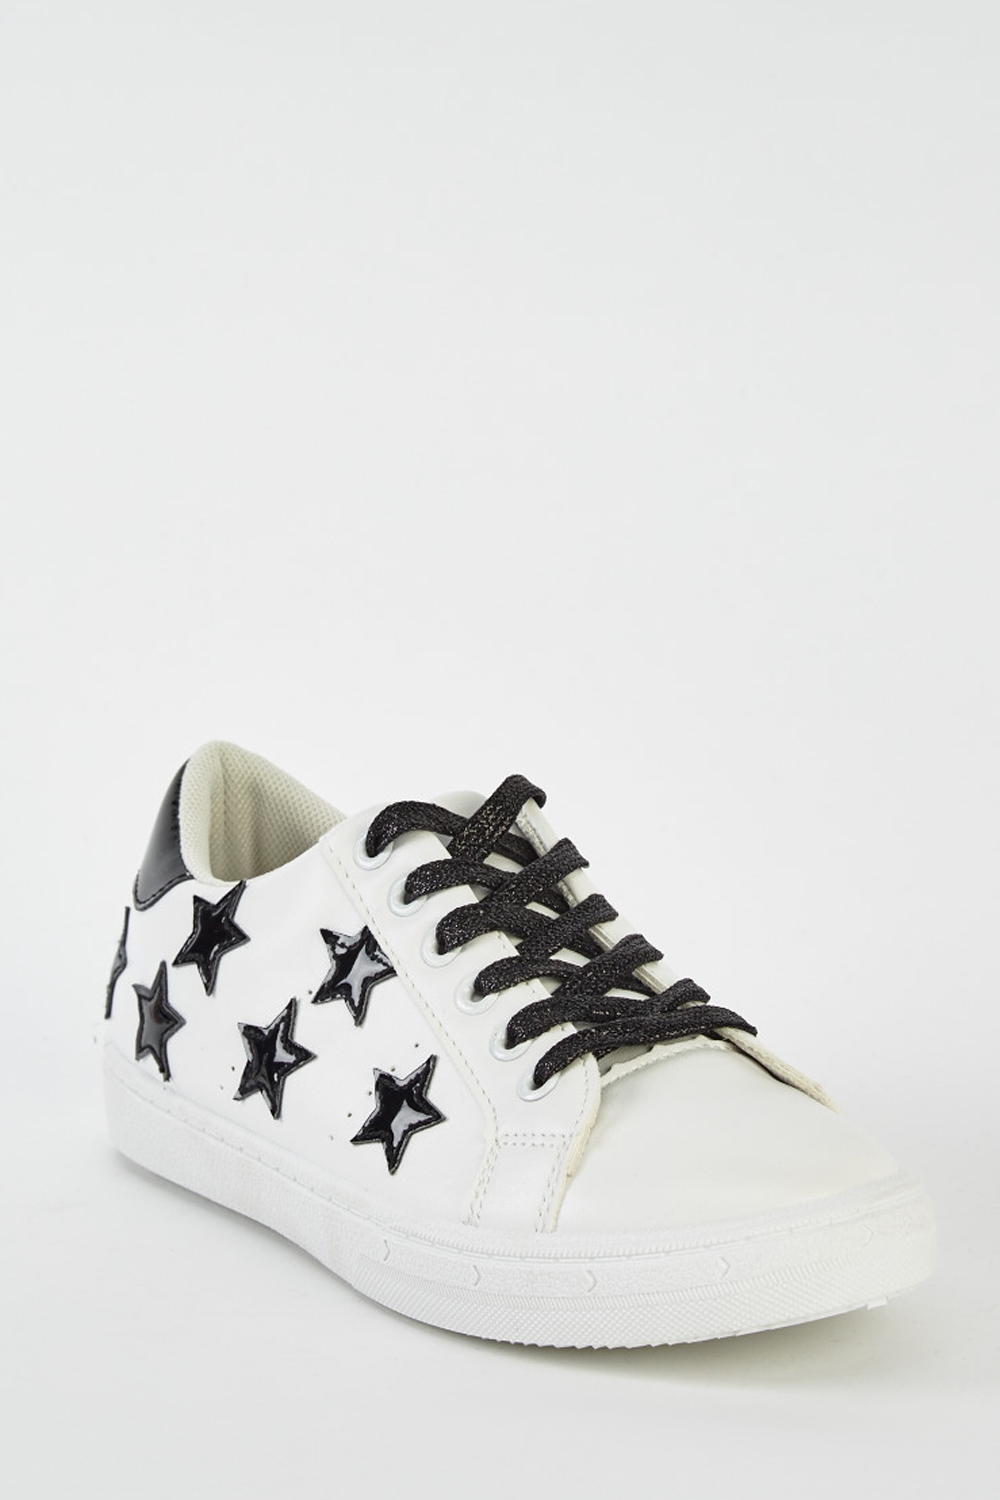 Star Quilted Contrast Trainers - Just £5